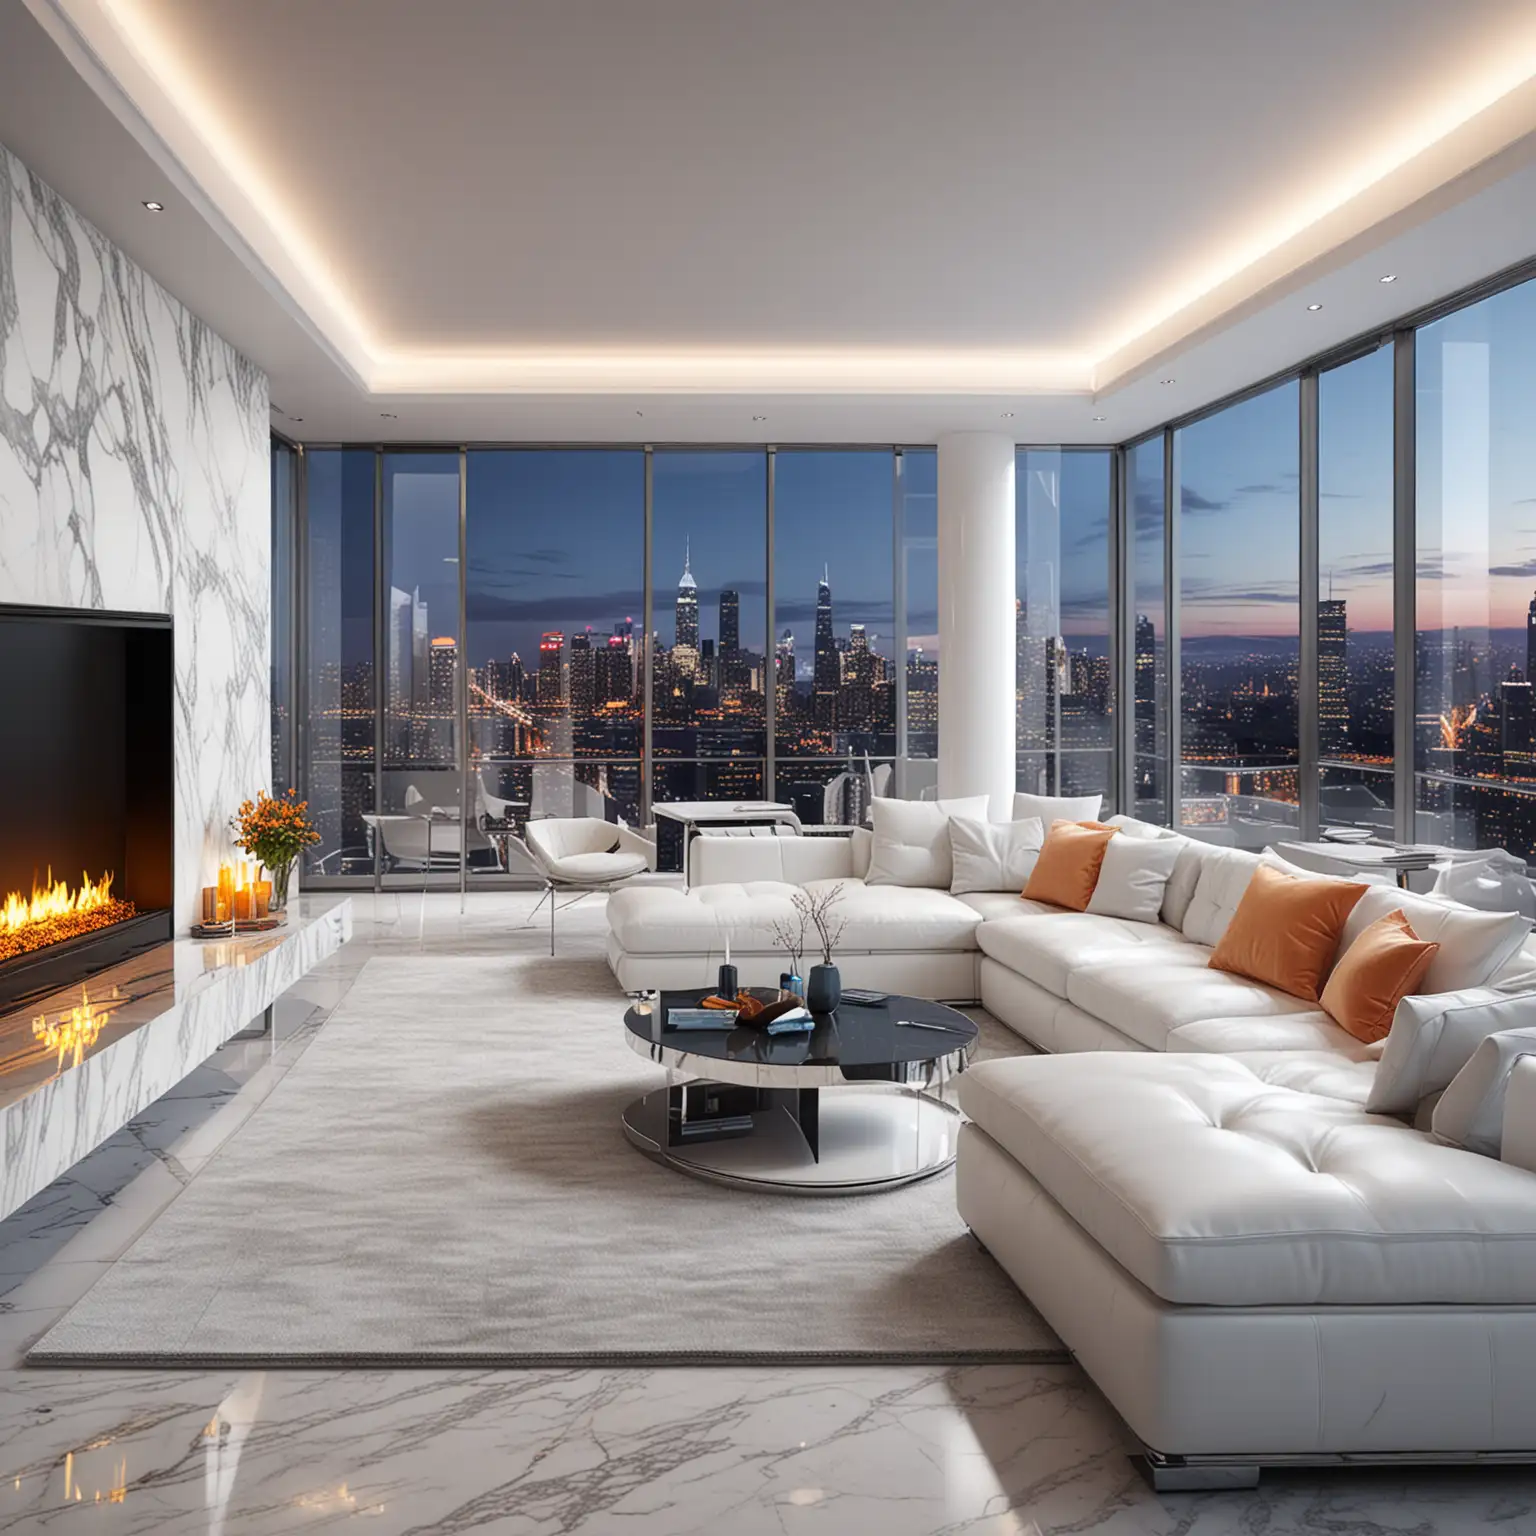 /imagine prompt: An ultramodern living room in a high-rise apartment overlooking a bustling cityscape, sleek white furniture with chrome accents contrasting against floor-to-ceiling glass windows, a minimalist fireplace embedded in a marble accent wall, abstract art pieces adorning the walls, the ambient glow of neon city lights illuminating the space, 3D rendering, using Blender with realistic lighting and textures, --ar 16:9 --v 5